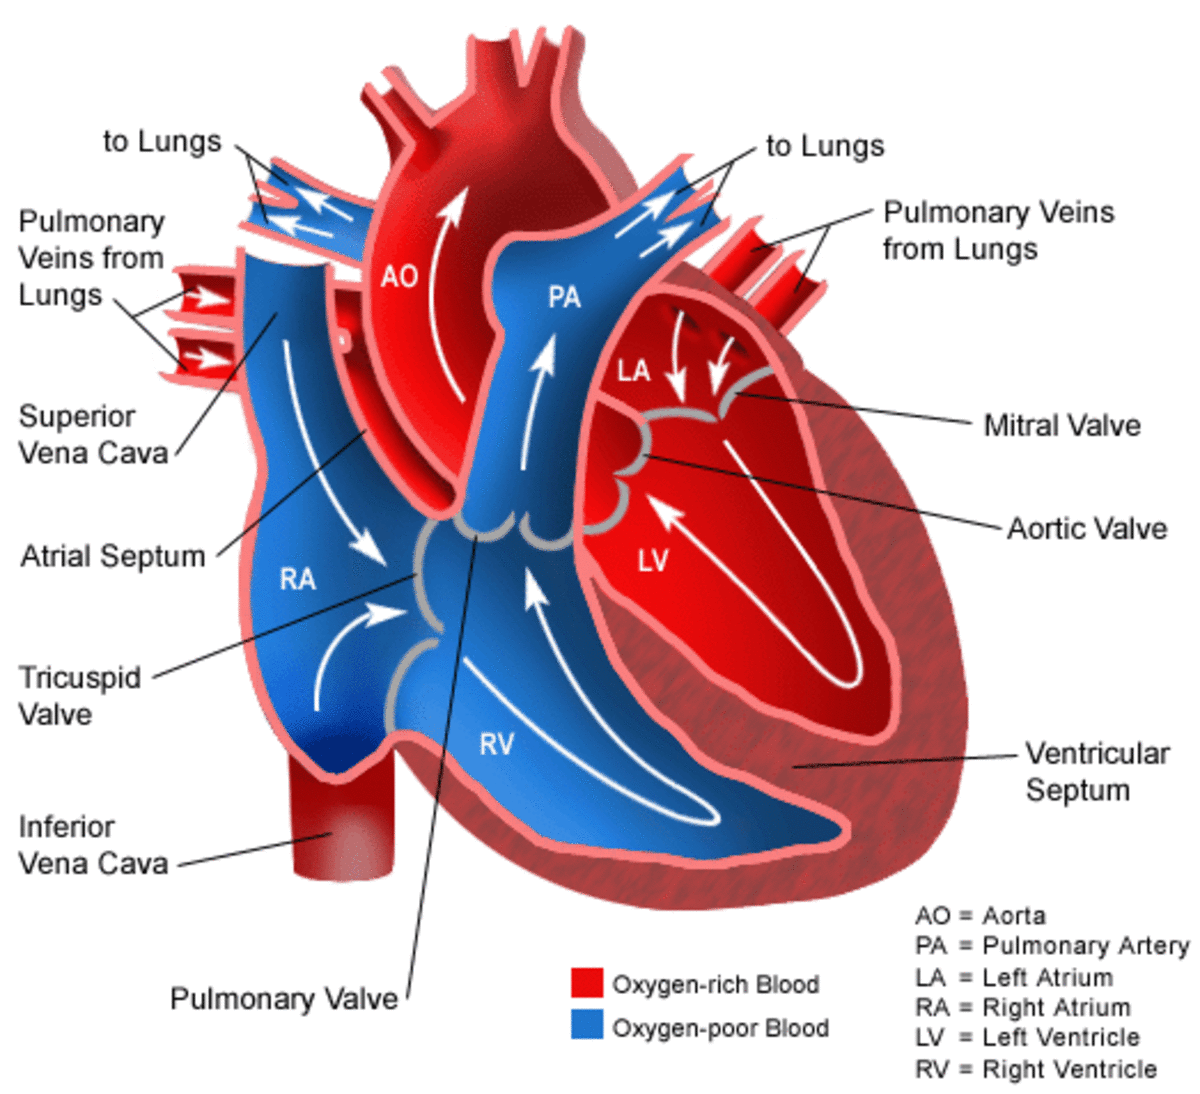 Anatomy of the Heart: Blood flow through the Heart and the Heart Valves involved.